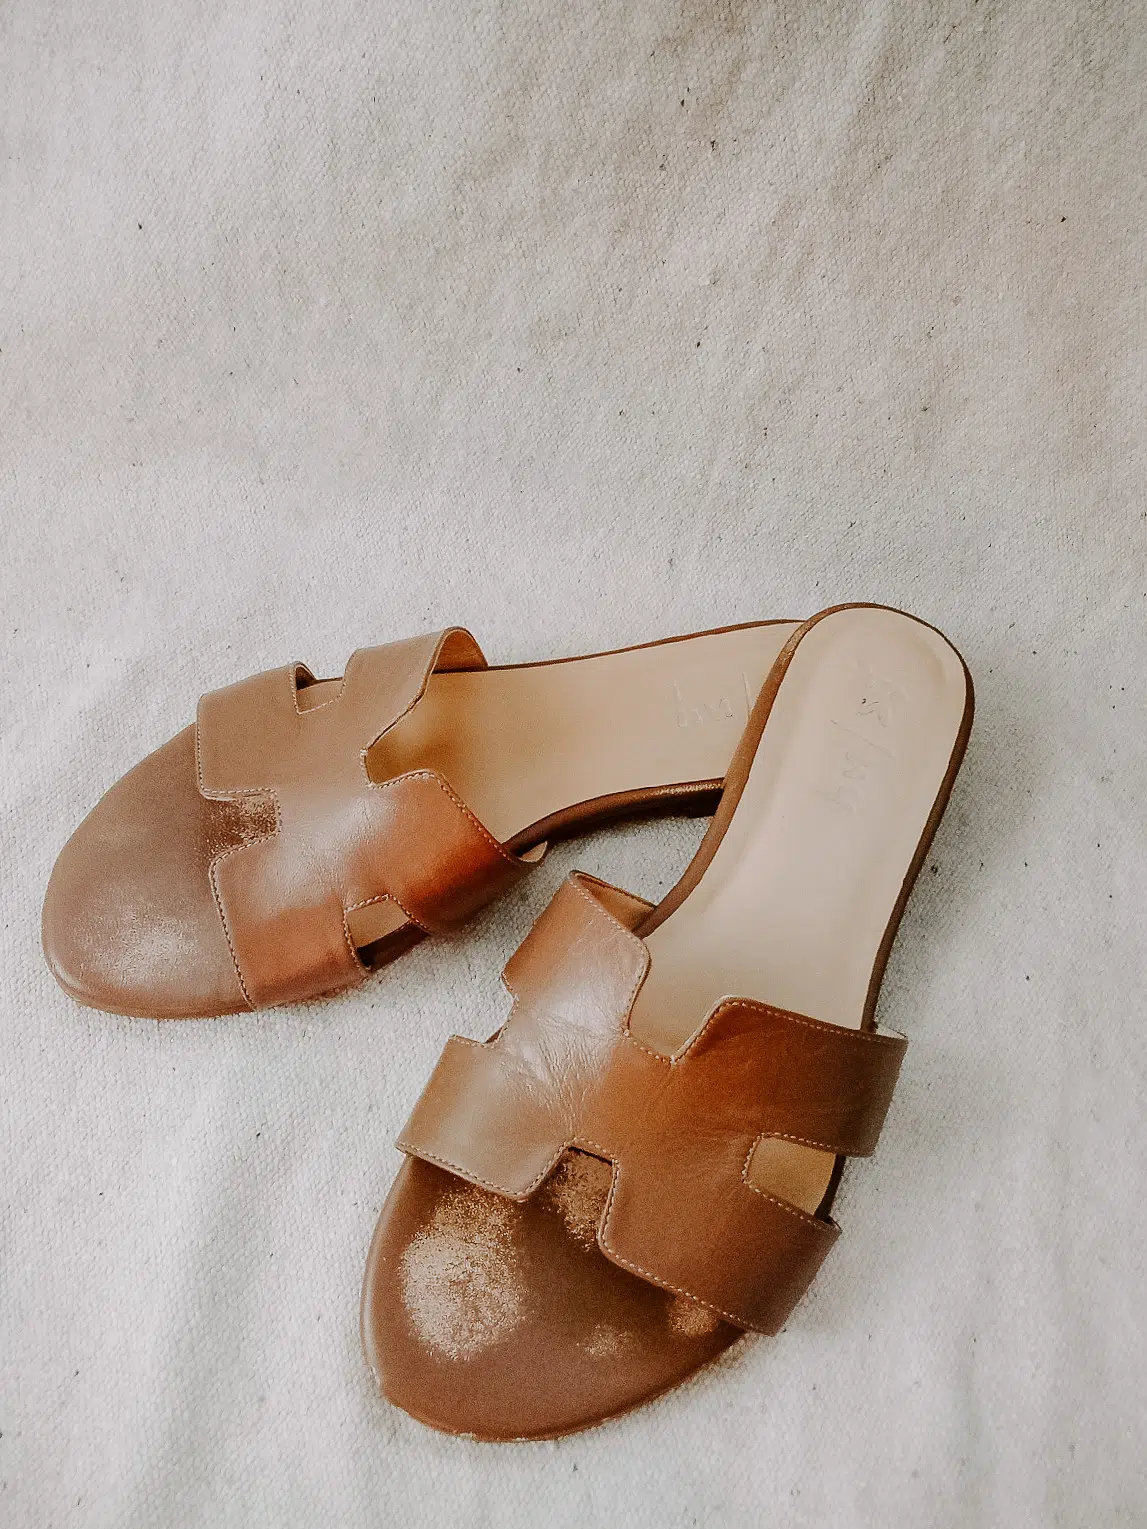 french sole alibi sandal 6 months later